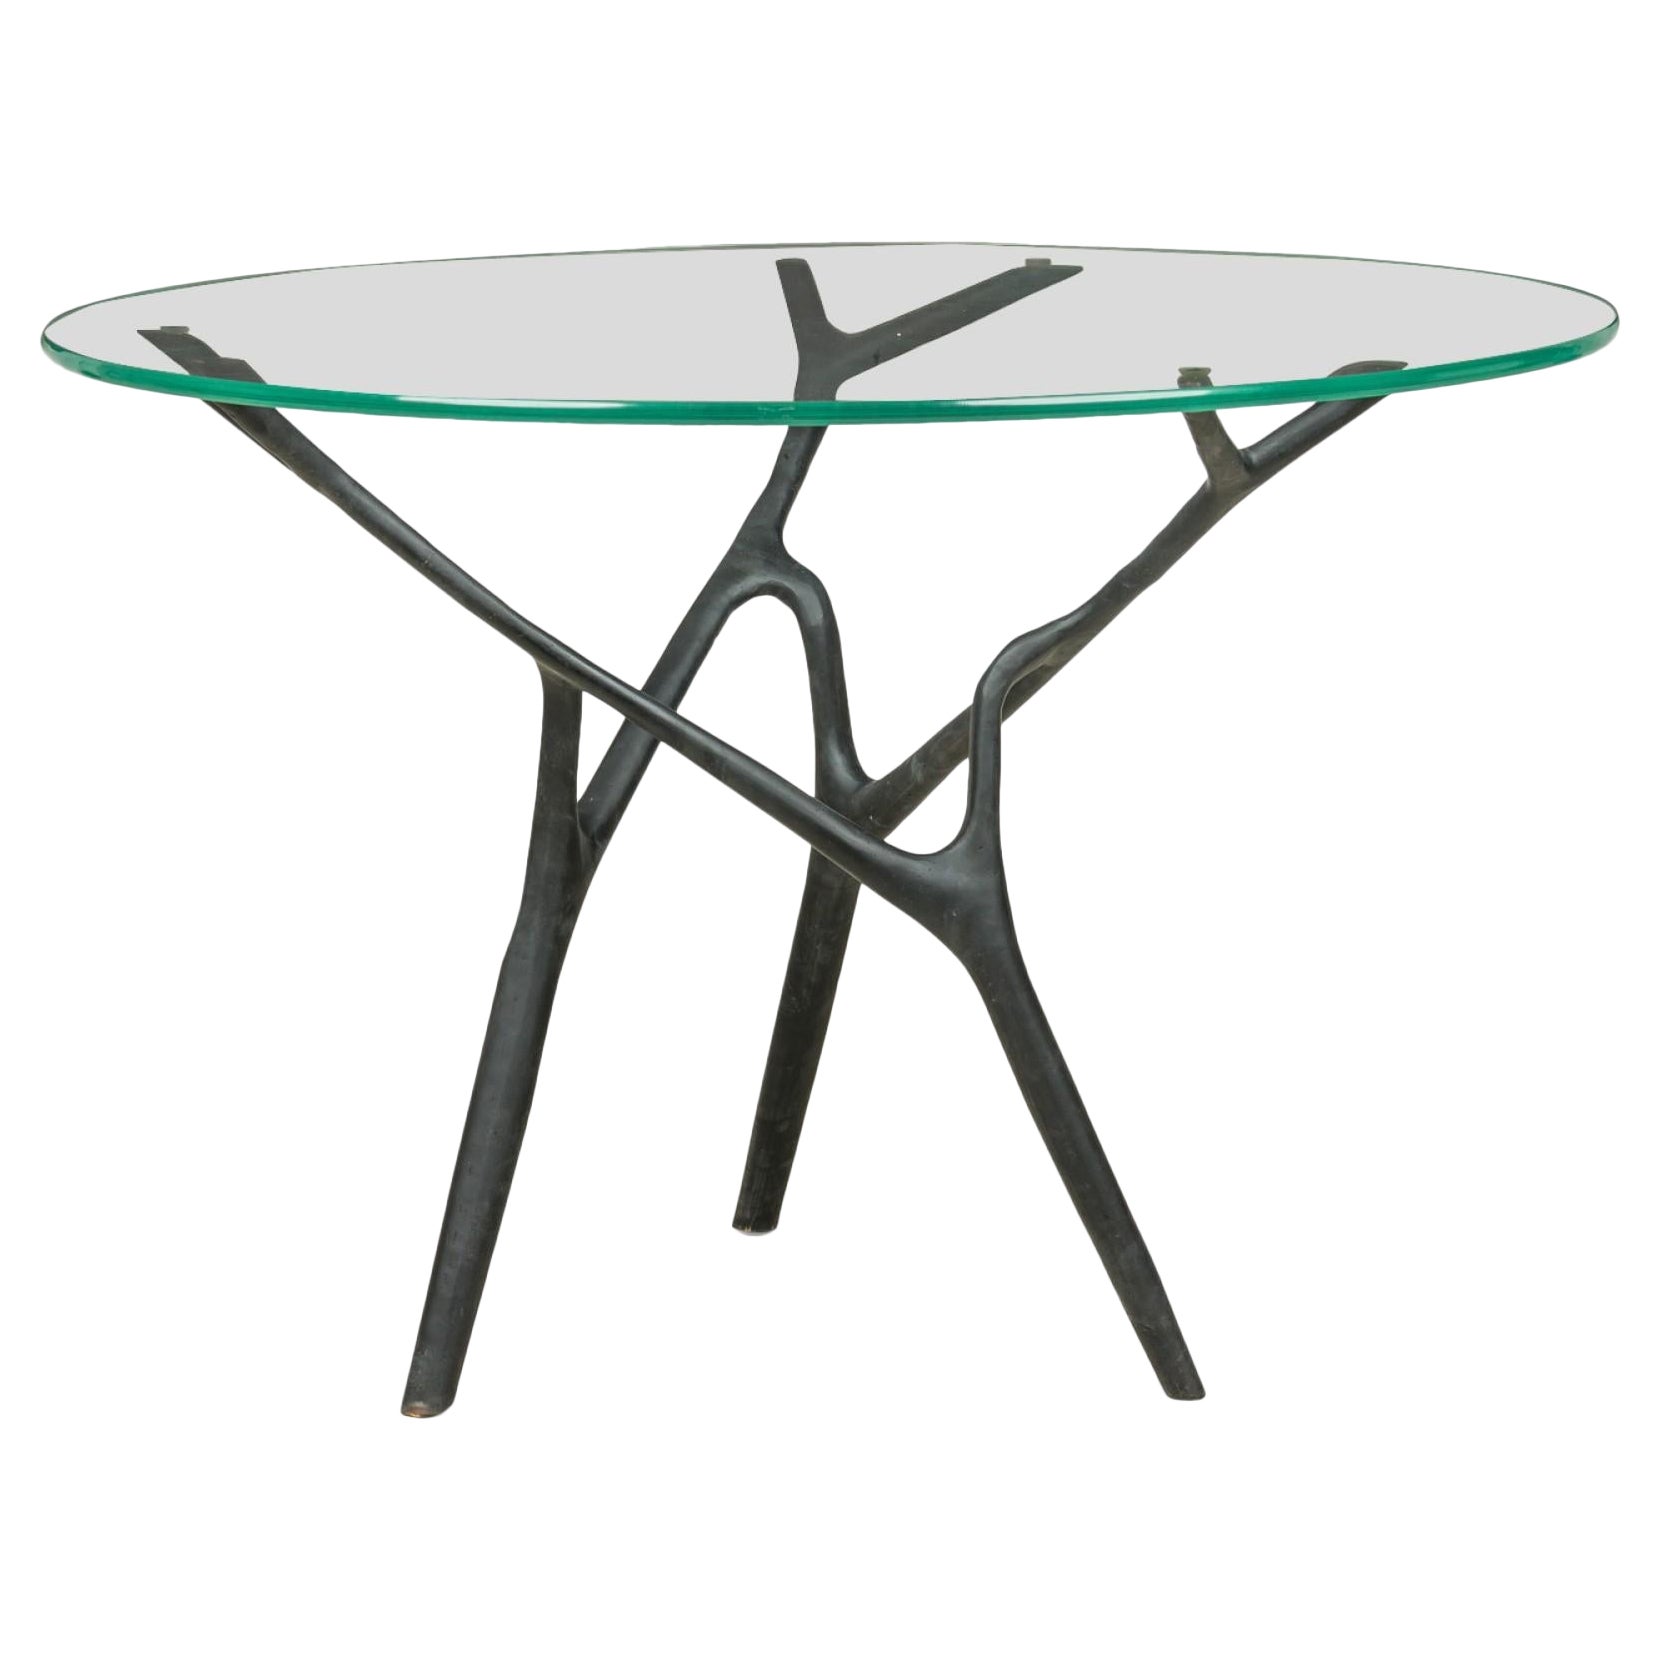 "Branco" Bronze and Glass Circular Organic Branch Form Dining Table